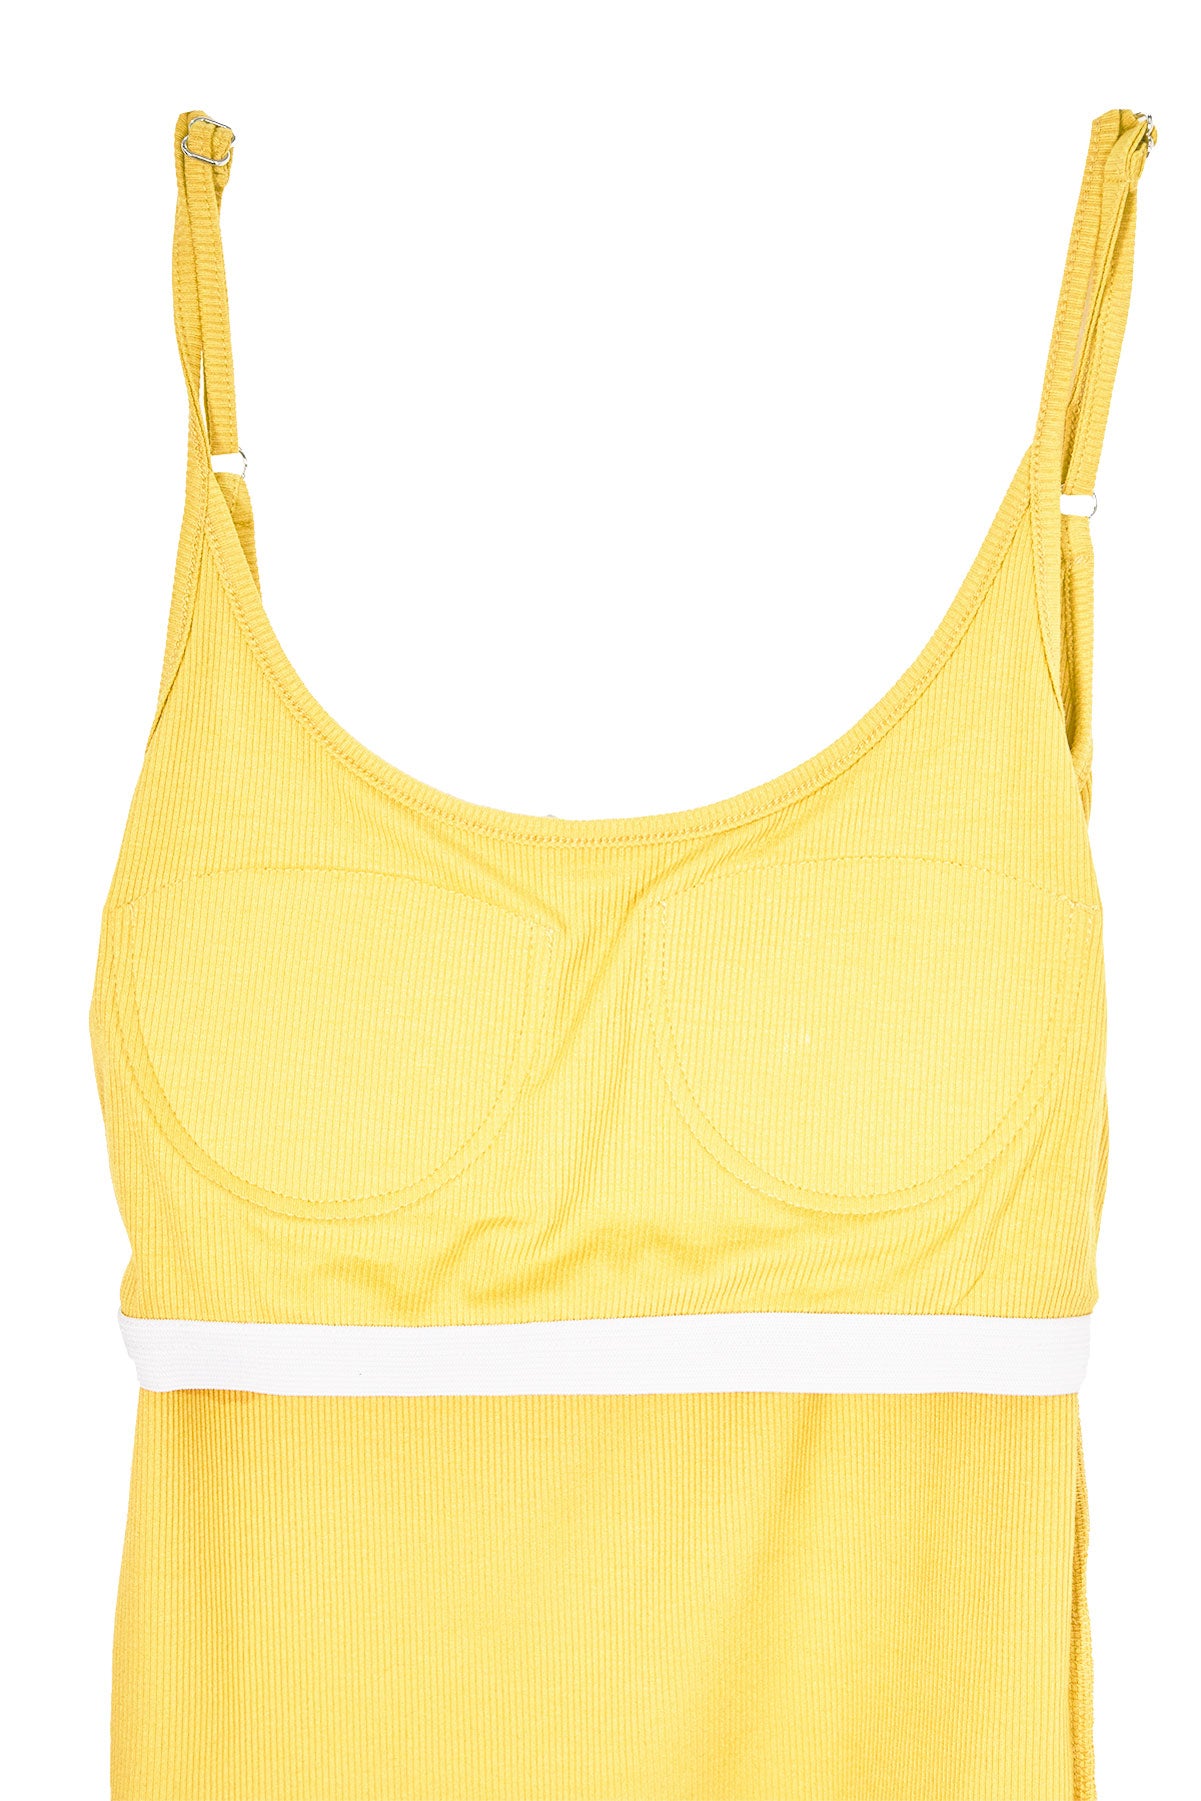 SISTERS Bra Cup Camisole / Yellow